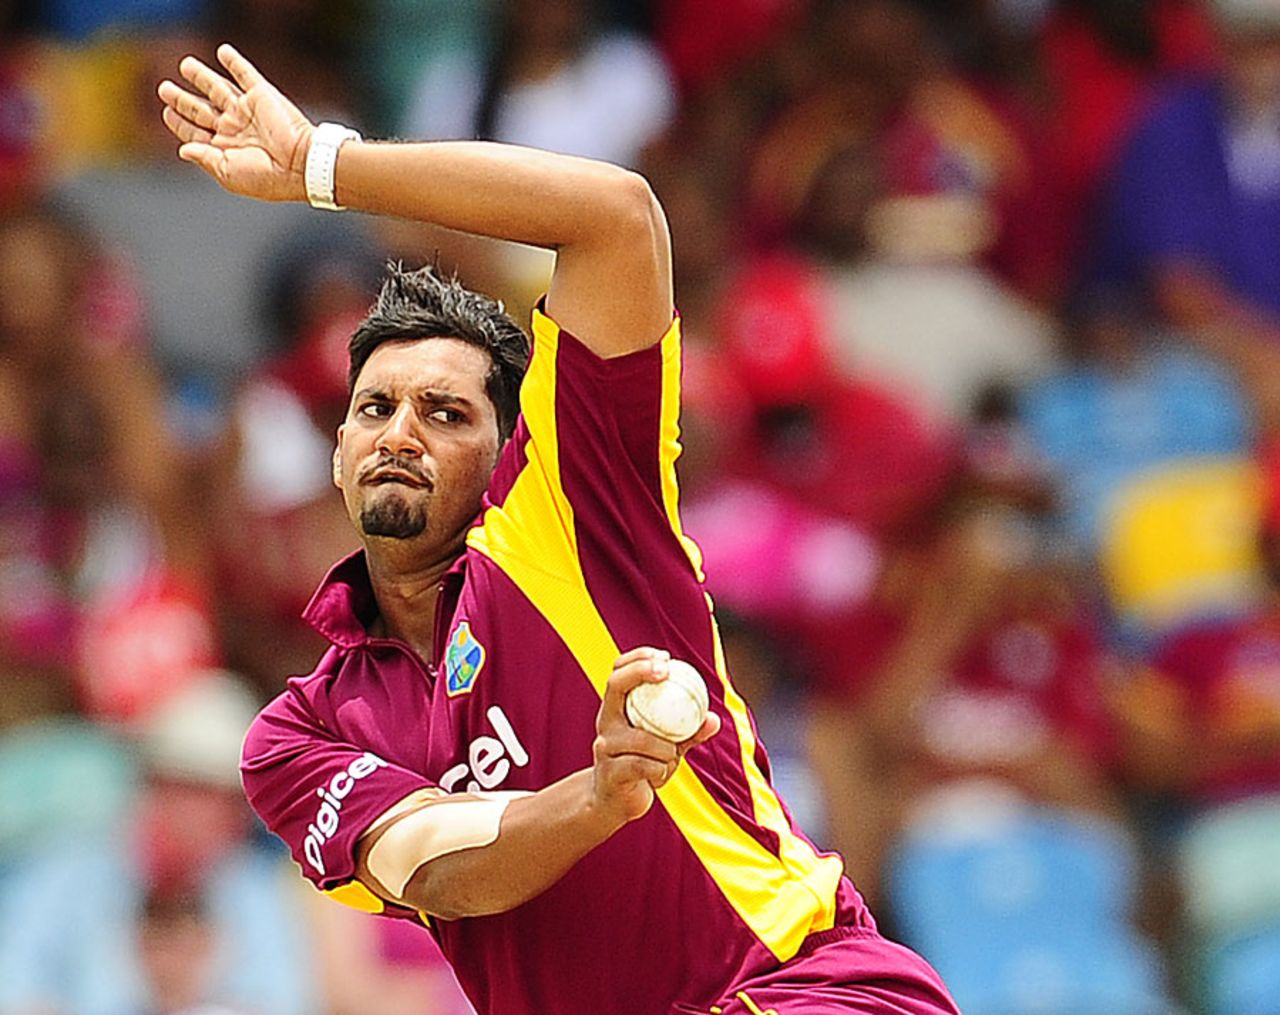 The in-form Ravi Rampaul was economical for West Indies, West Indies v Pakistan, 4th ODI, Barbados, May 2, 2011